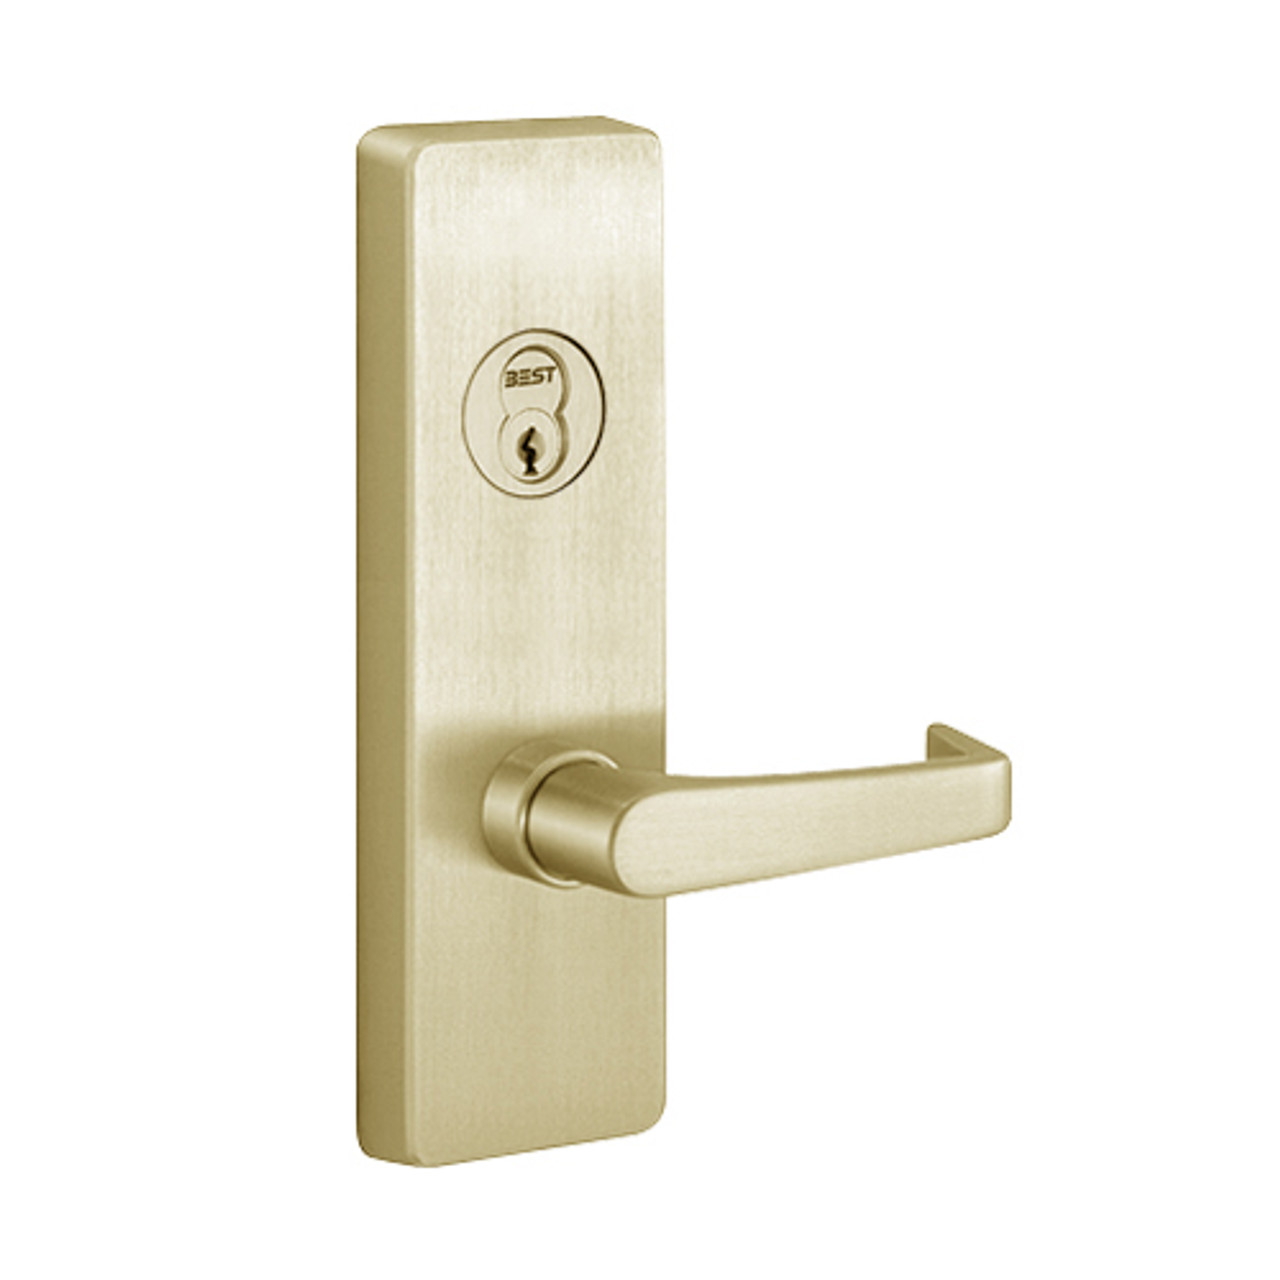 Y4914A-606-RHR PHI Lever Retrofit Trim Always Active with A Lever Design for Olympian Series Exit Device in Satin Brass Finish